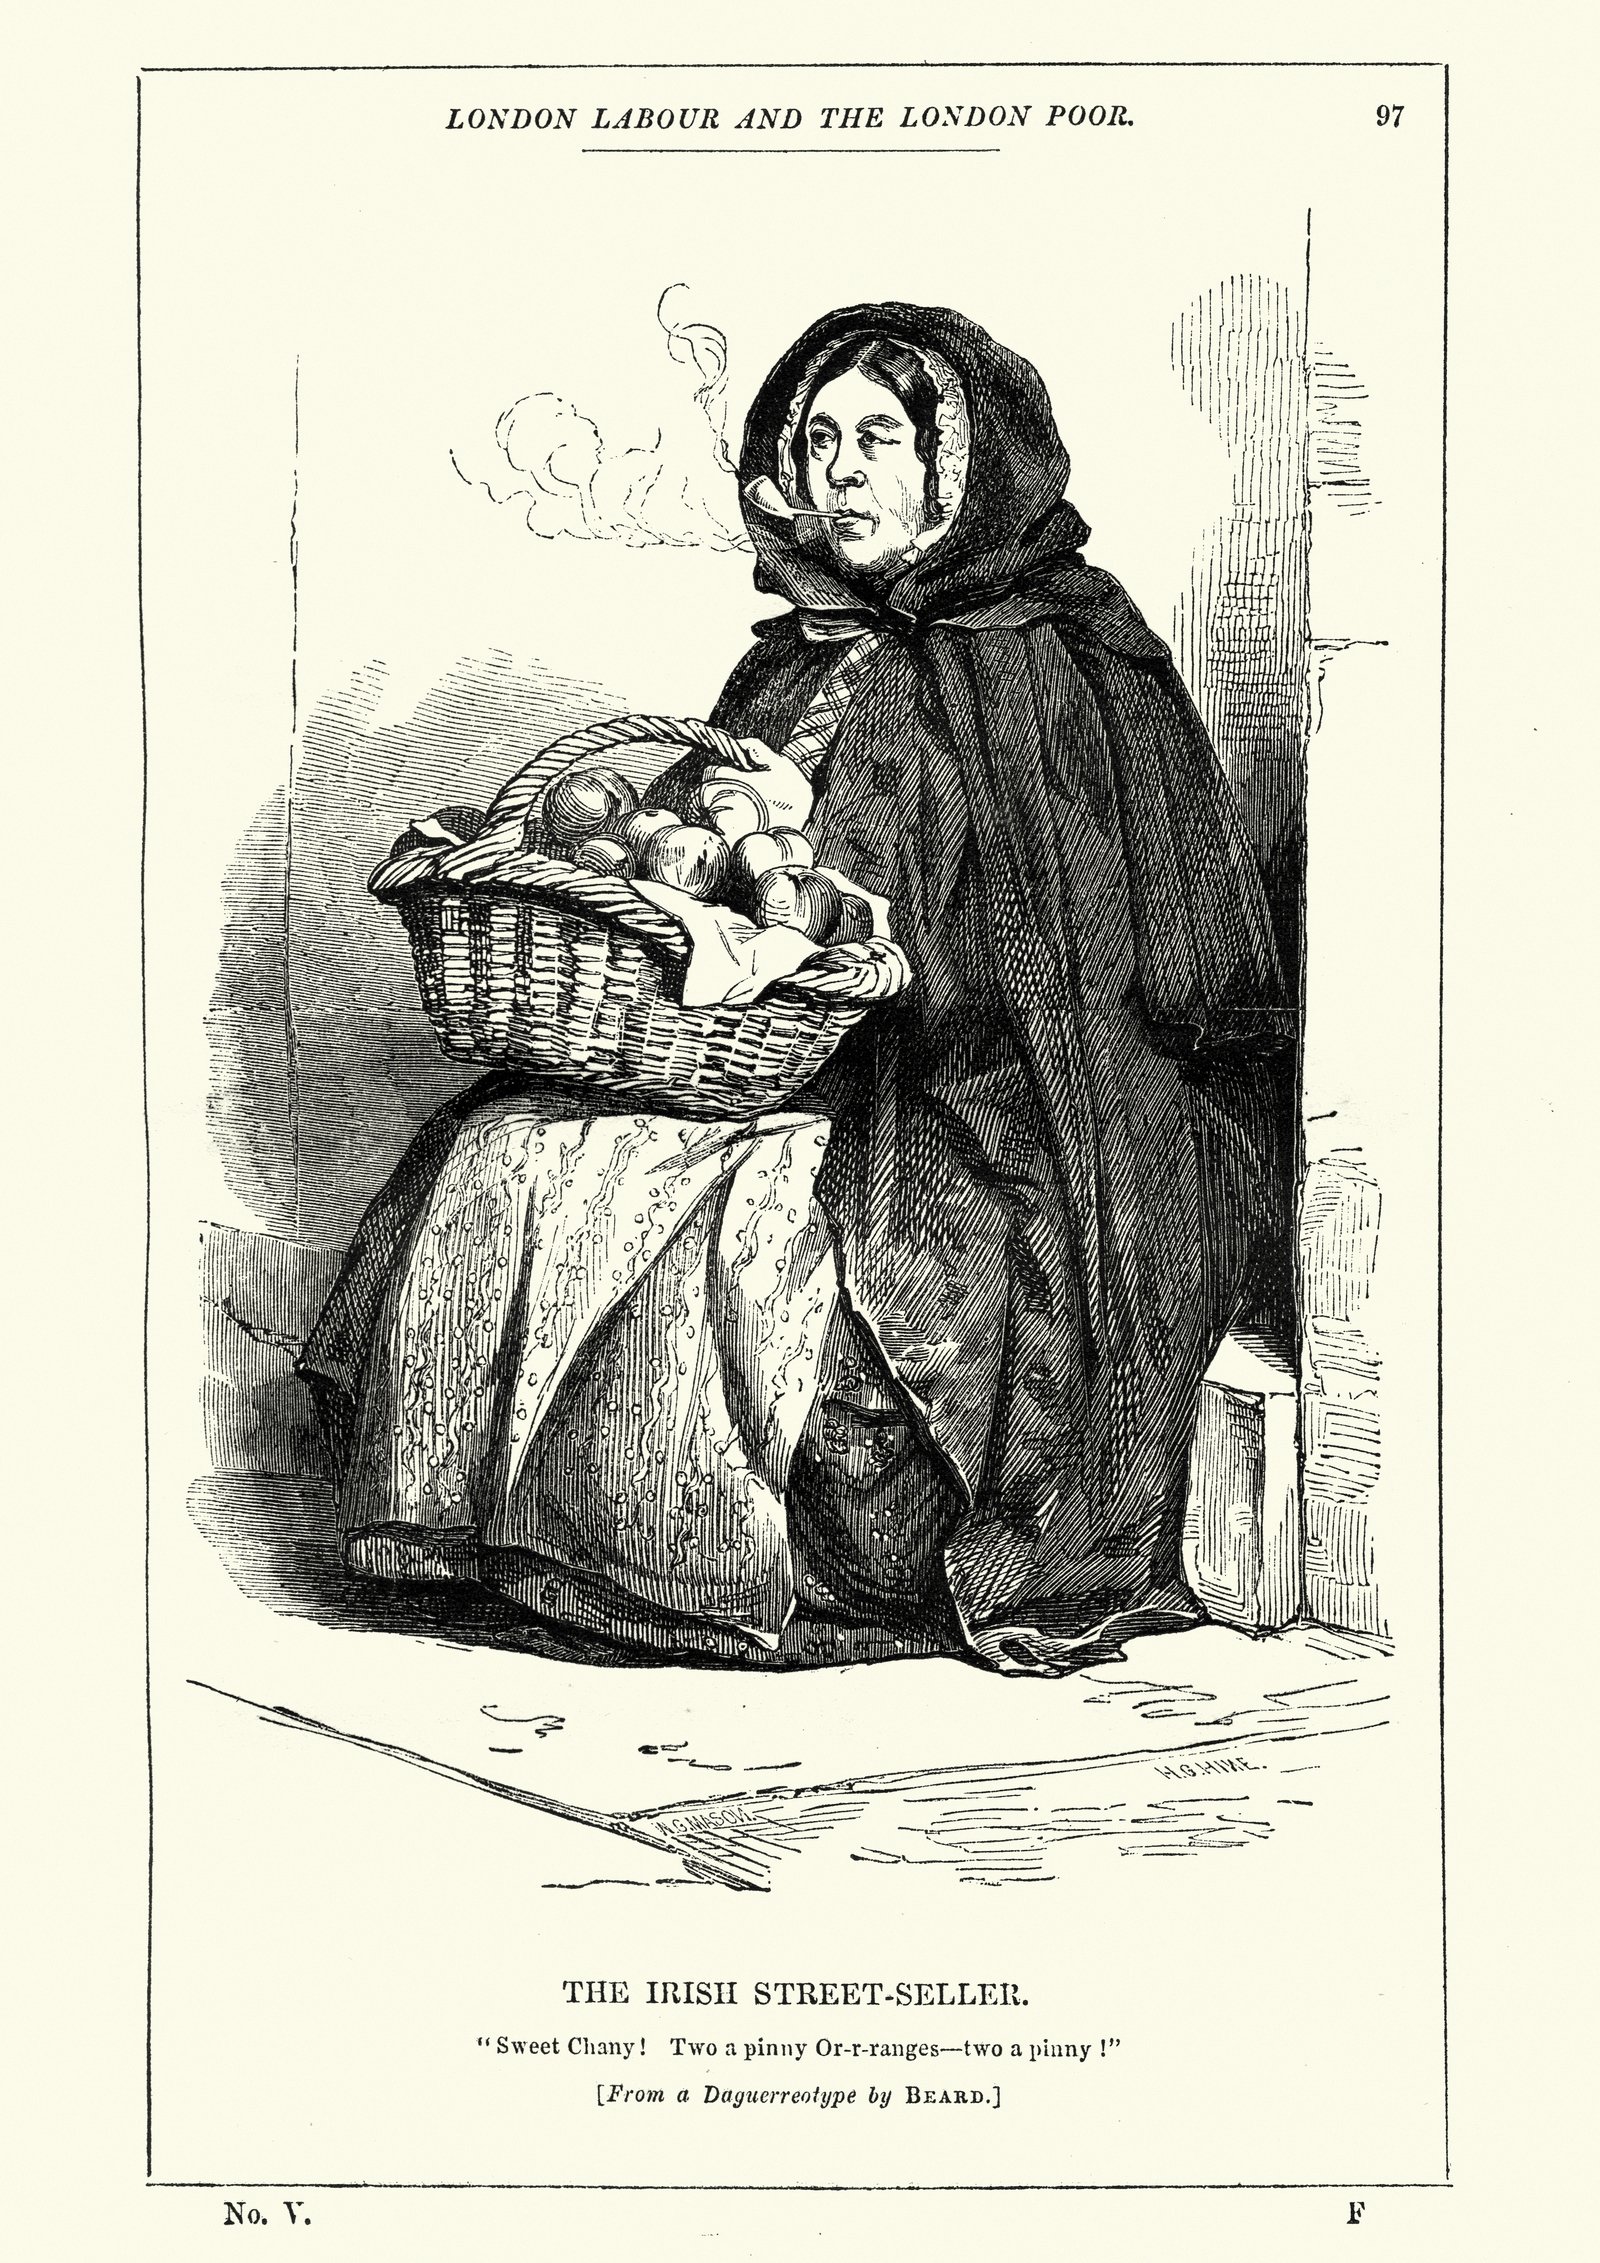 Image - The Irish Street-Seller from Henry Mayhew's famous account of Victorian London 'London Labour and the London Poor.' Mayhew calculated that in 1861 the Irish made up a third of the fruit sellers in London. Source: Getty Images